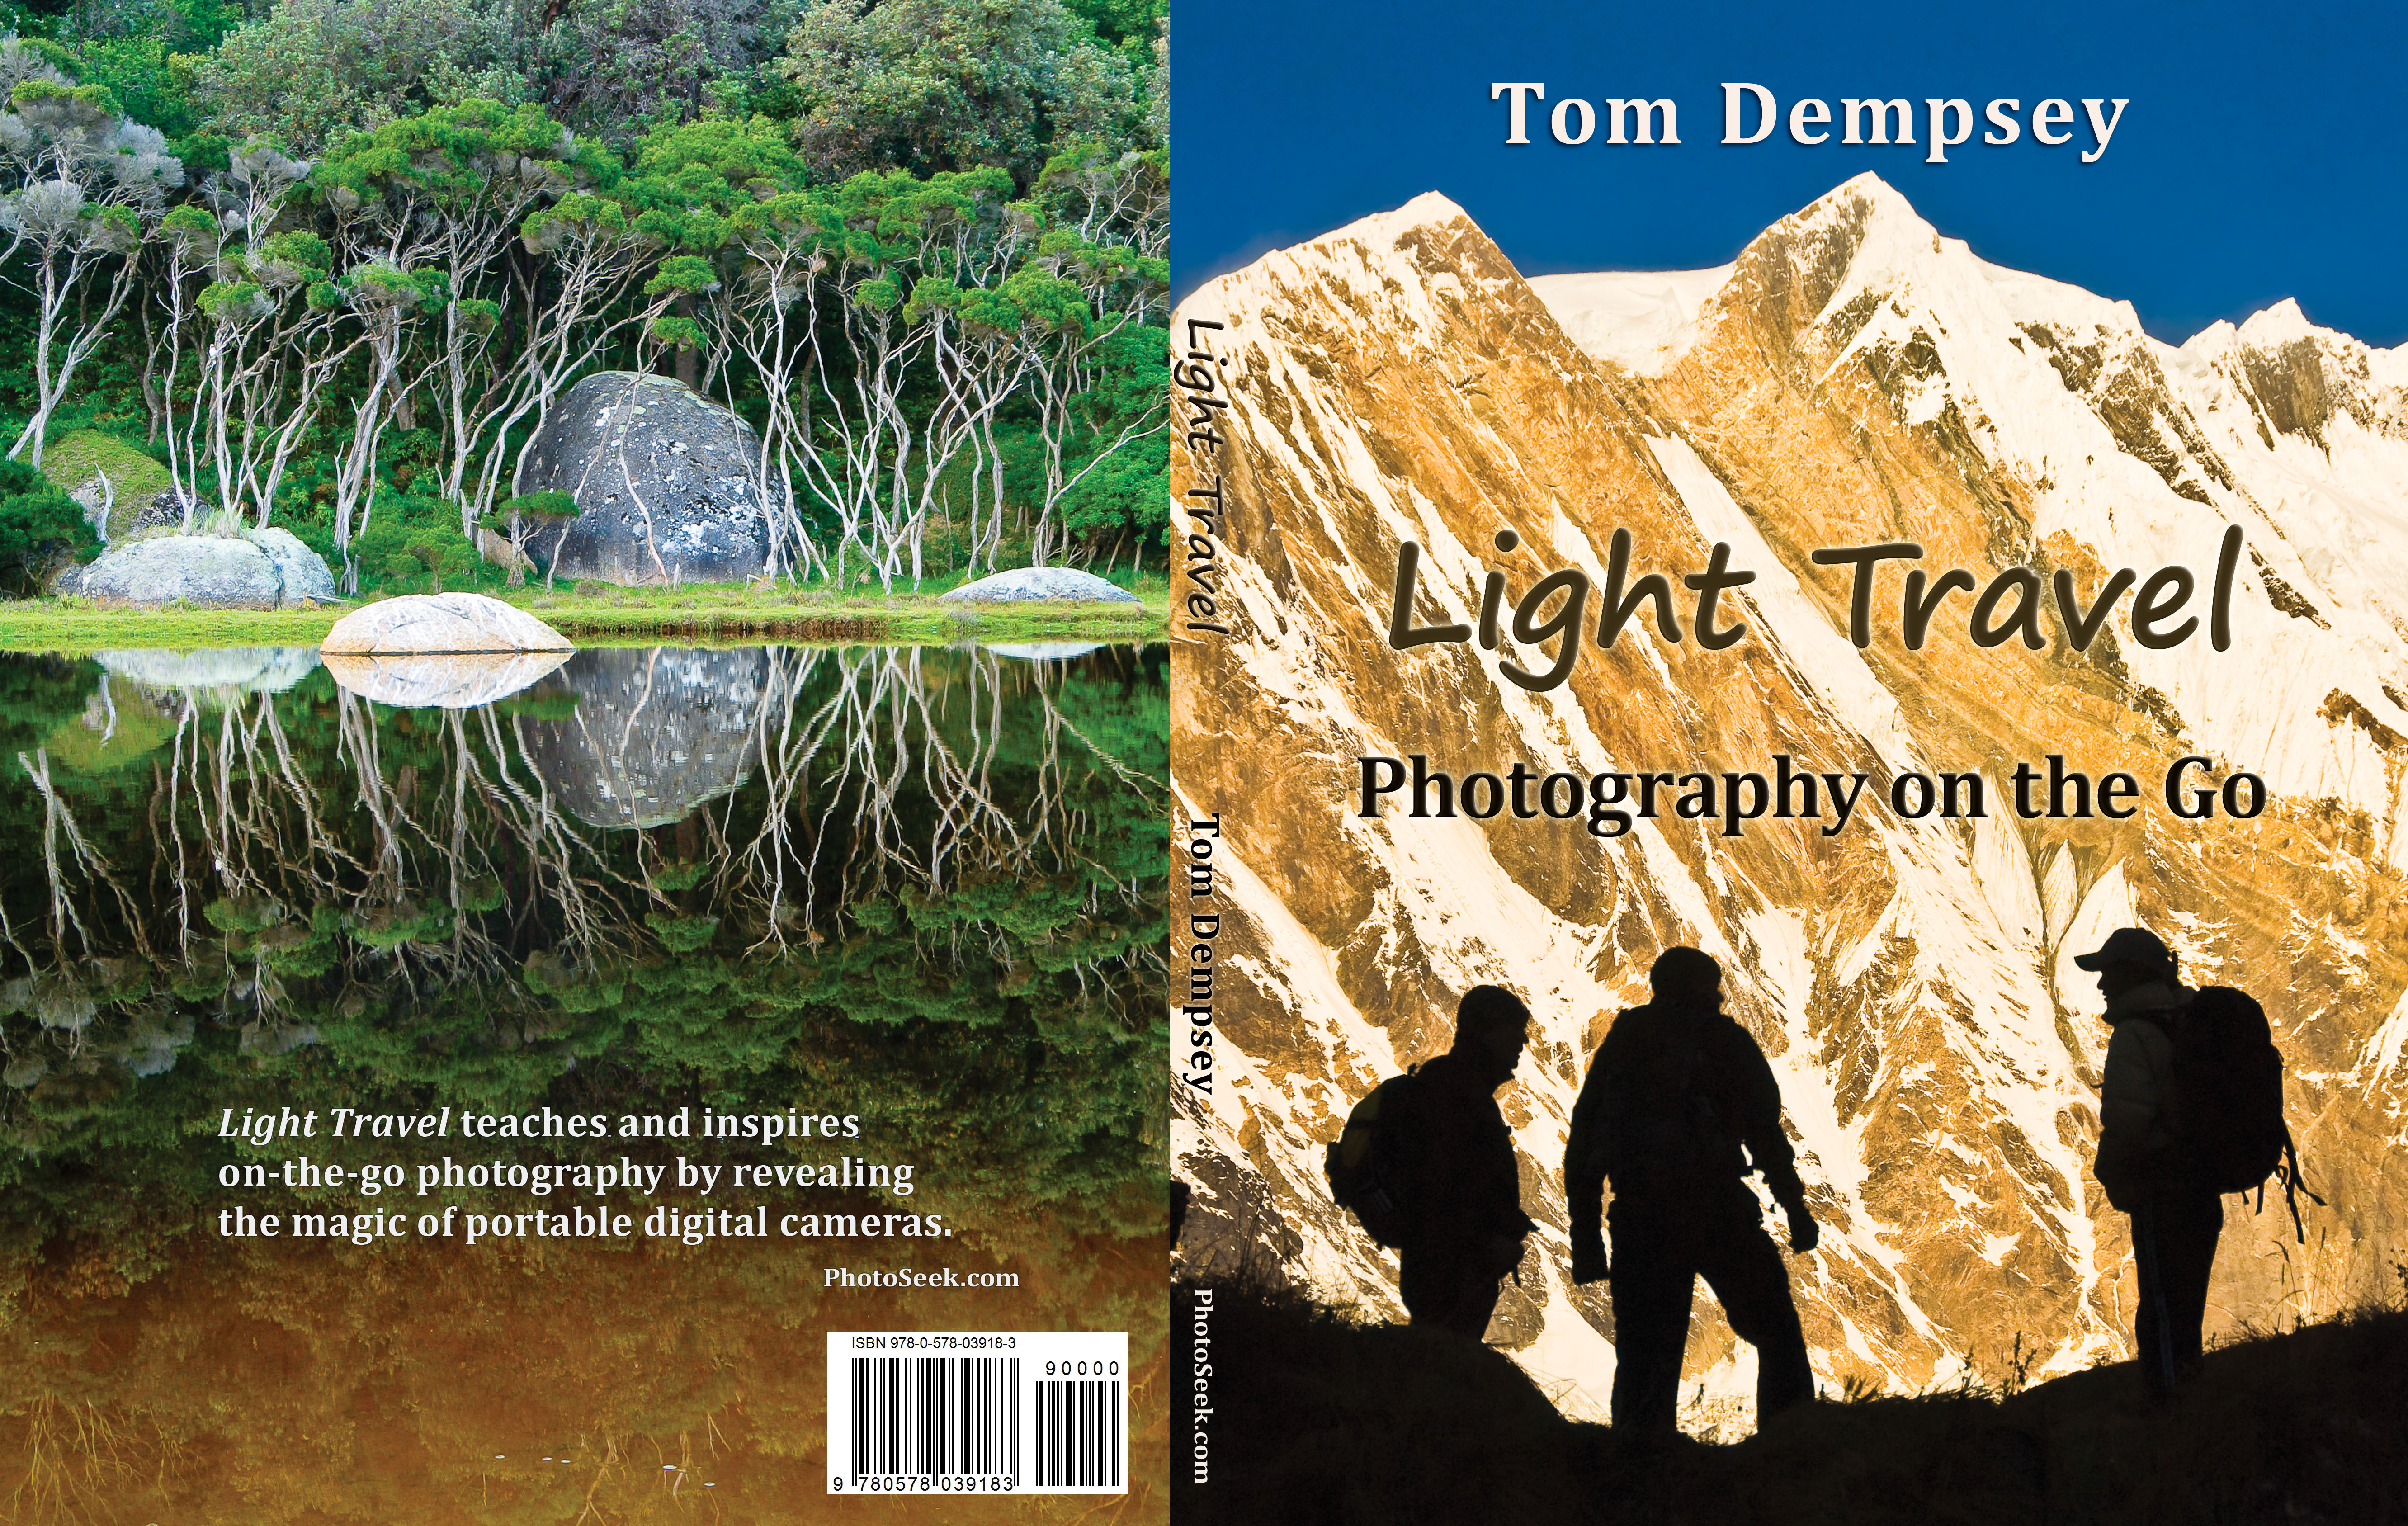 Light Travel book cover by Tom Dempsey